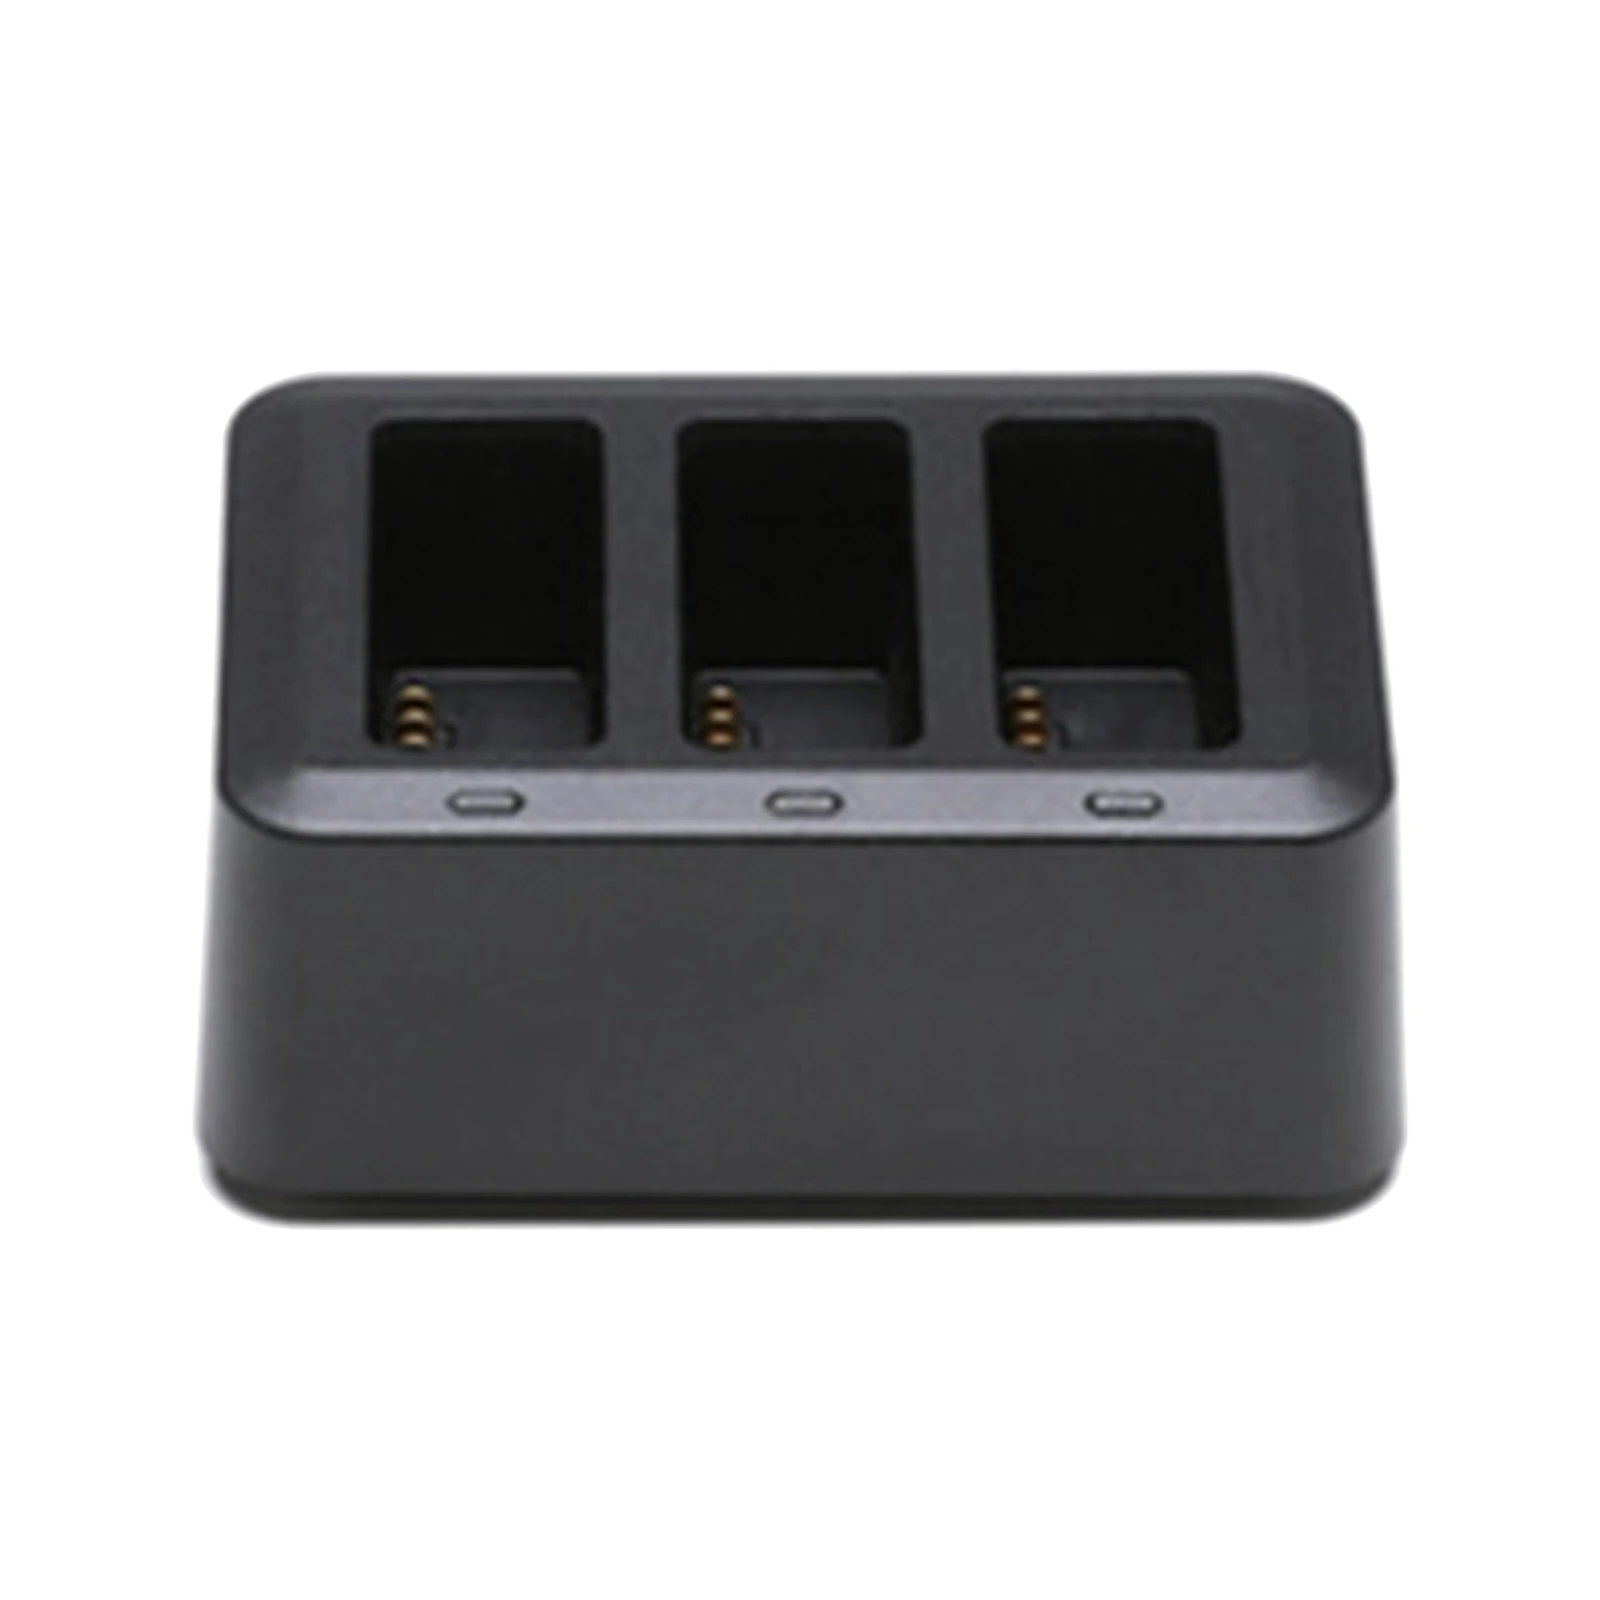 Portable Smarts Battery Charging 1100 Mah 3.8 V + 3 in 1 Intelligent Charger Hub for Dji Tello Drone Flying Battery Accessories